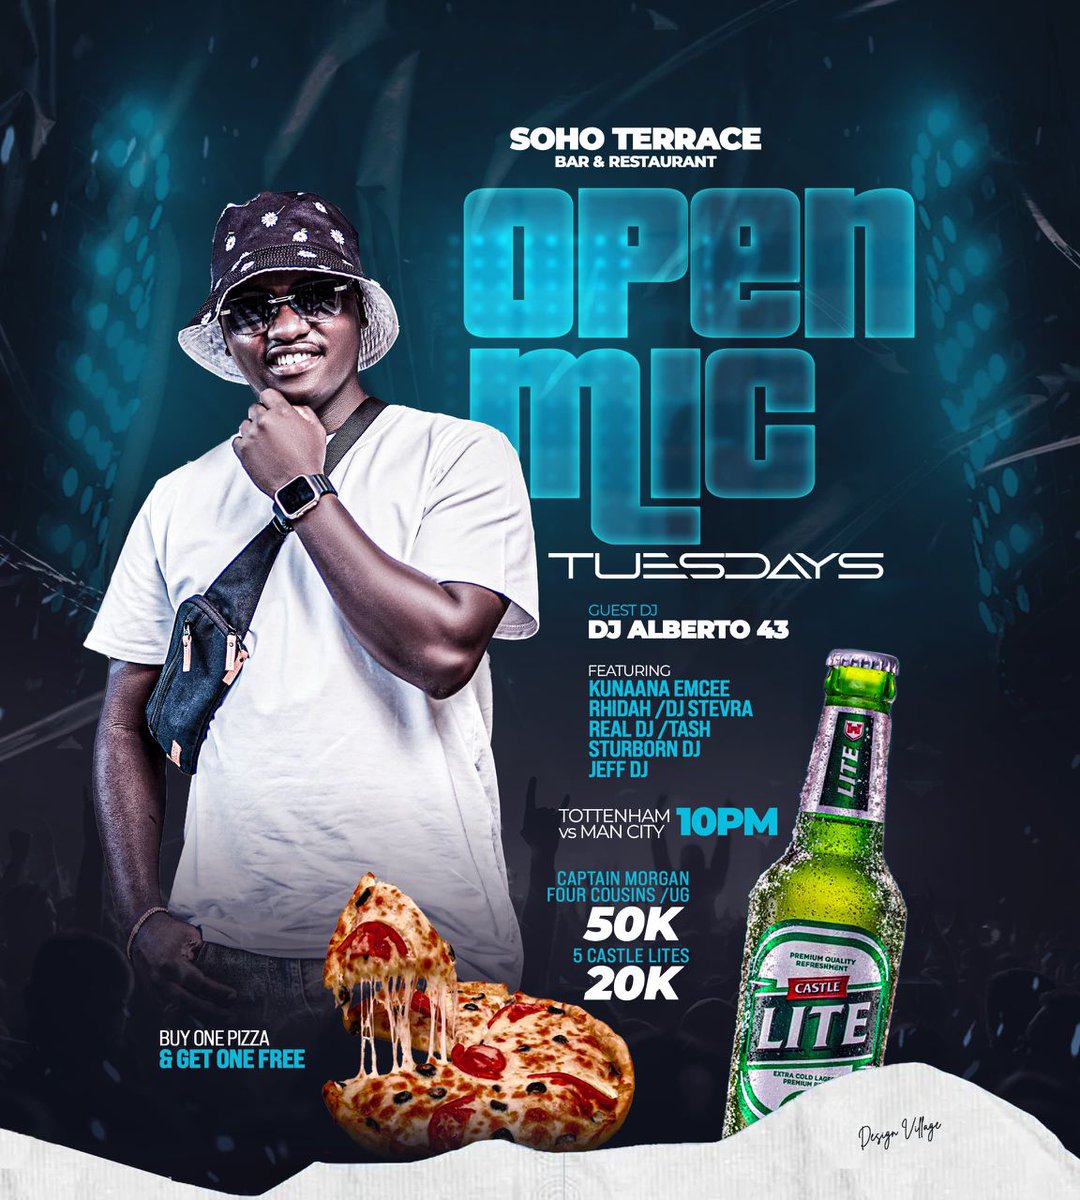 #OPENMICTUESDAY it will make you sing @djalberto43 will be on decks as your guest.